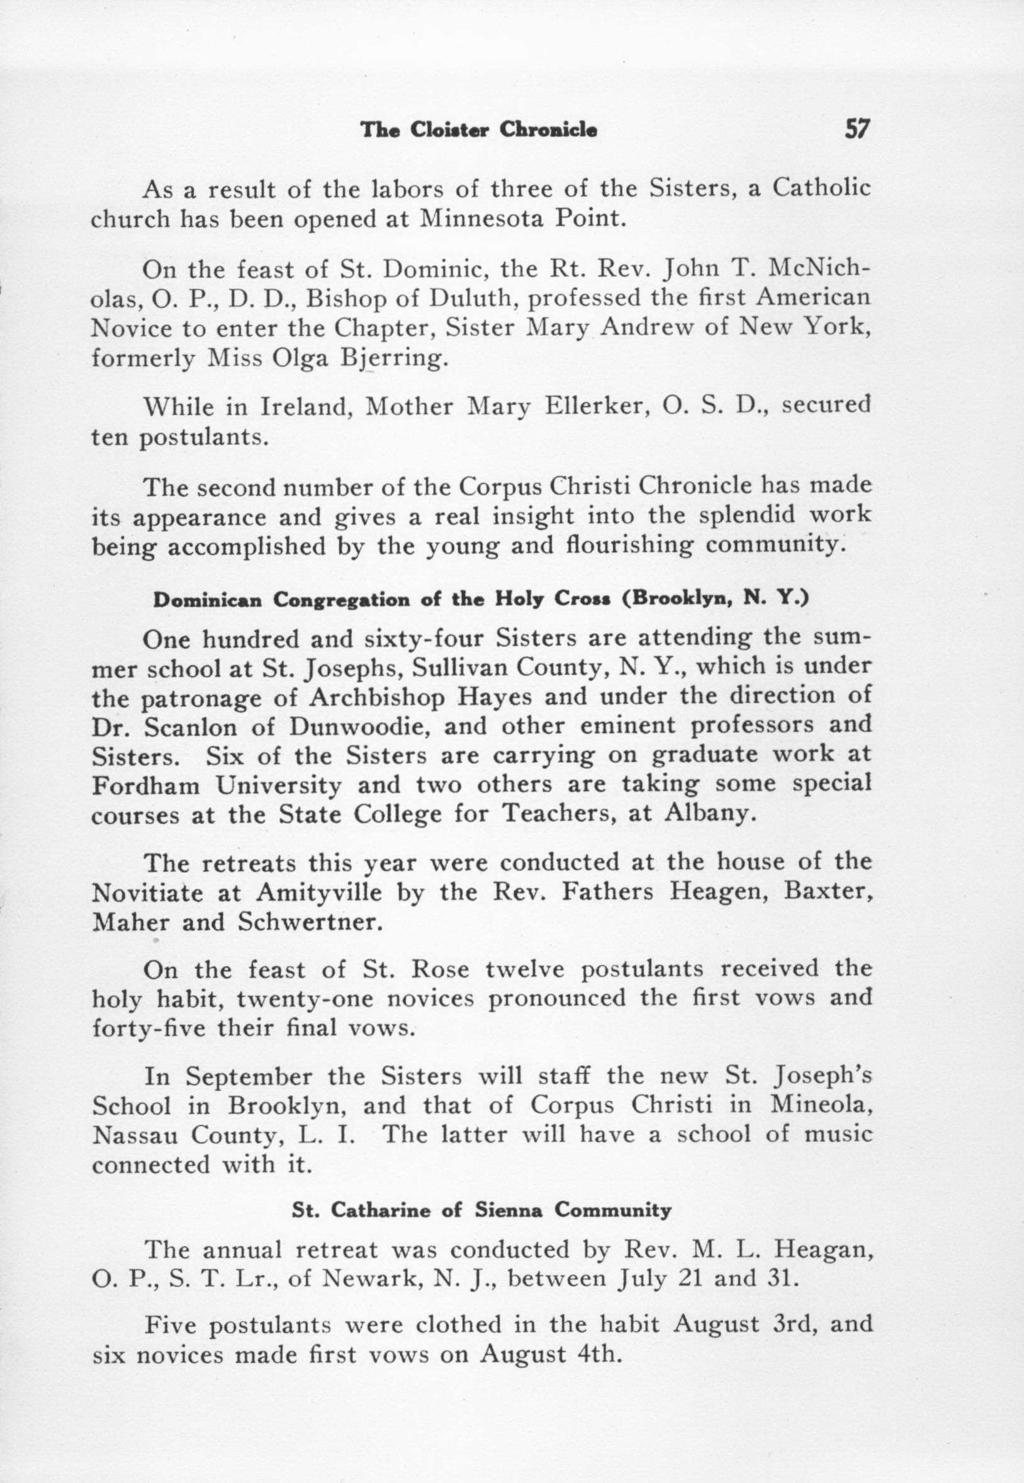 The Cloister Chroaide 57 As a result of the labors of three of the Sisters, a Catholic church has been opened at Minnesota Point. On the feast of St. Dominic, the Rt. Rev. John T. McNicholas, 0. P., D.